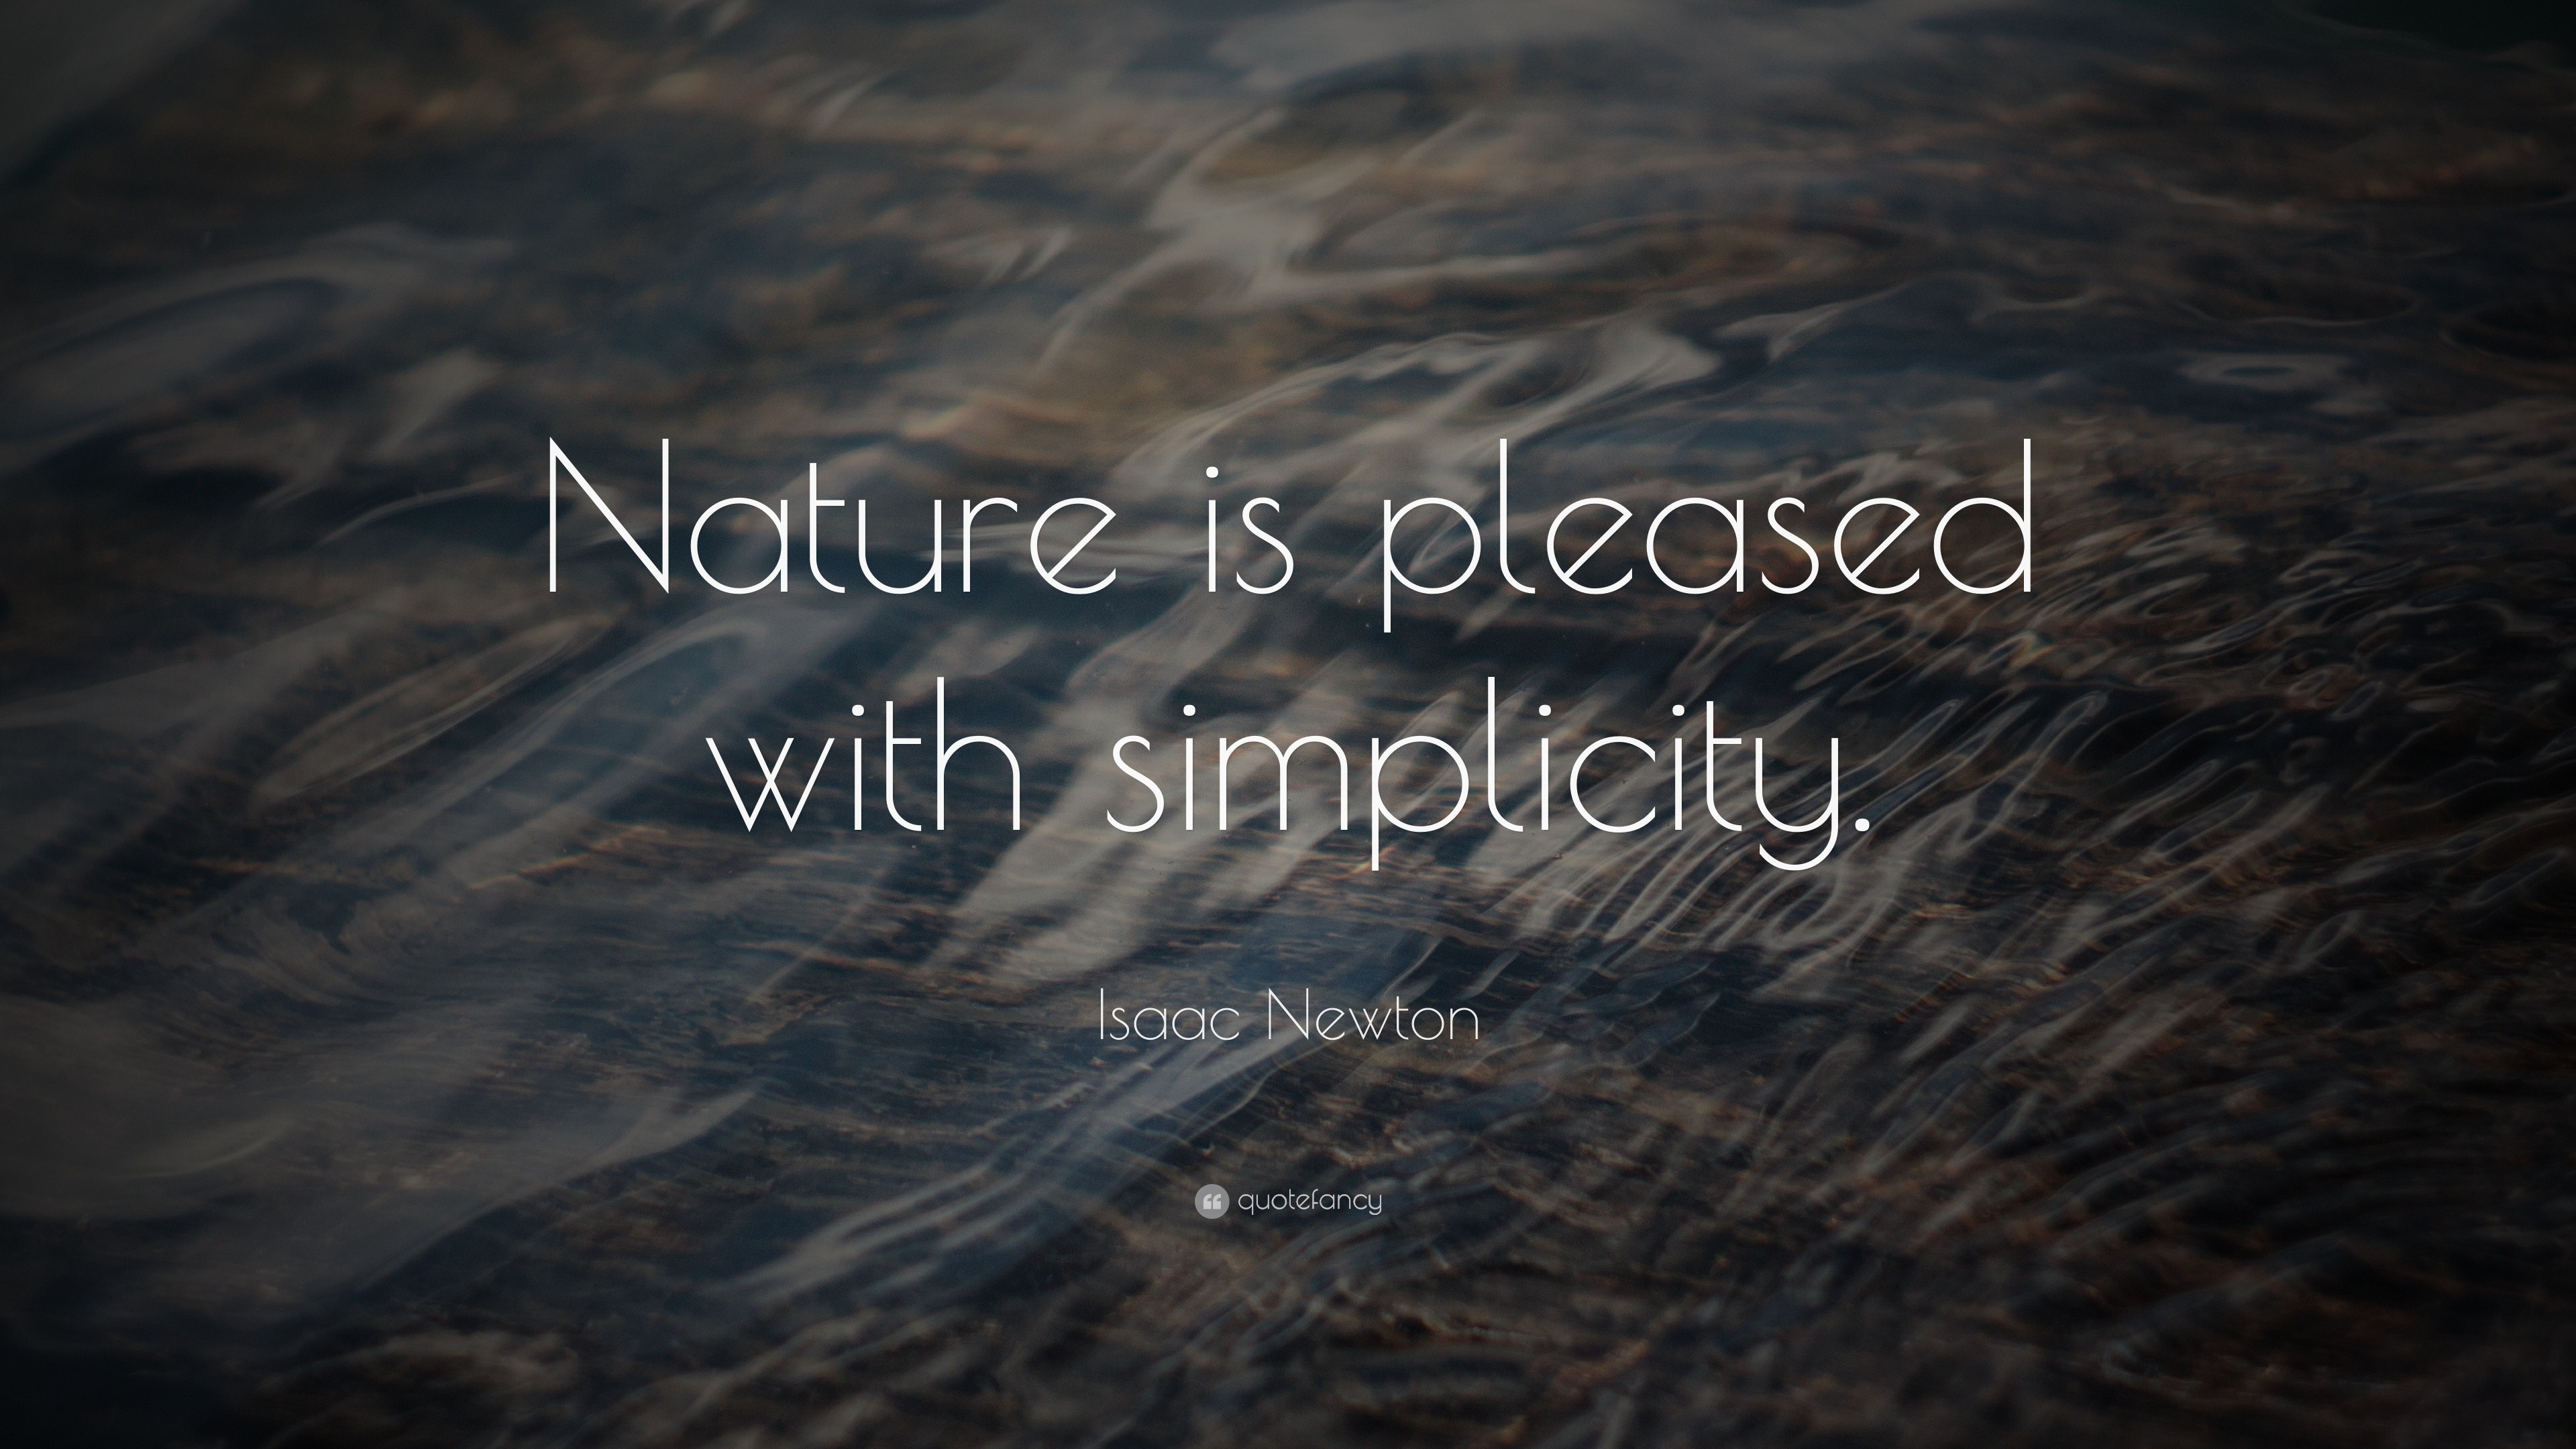 måle Sund mad friktion Top 30 Nature Quotes (2022 Update) - Quotefancy